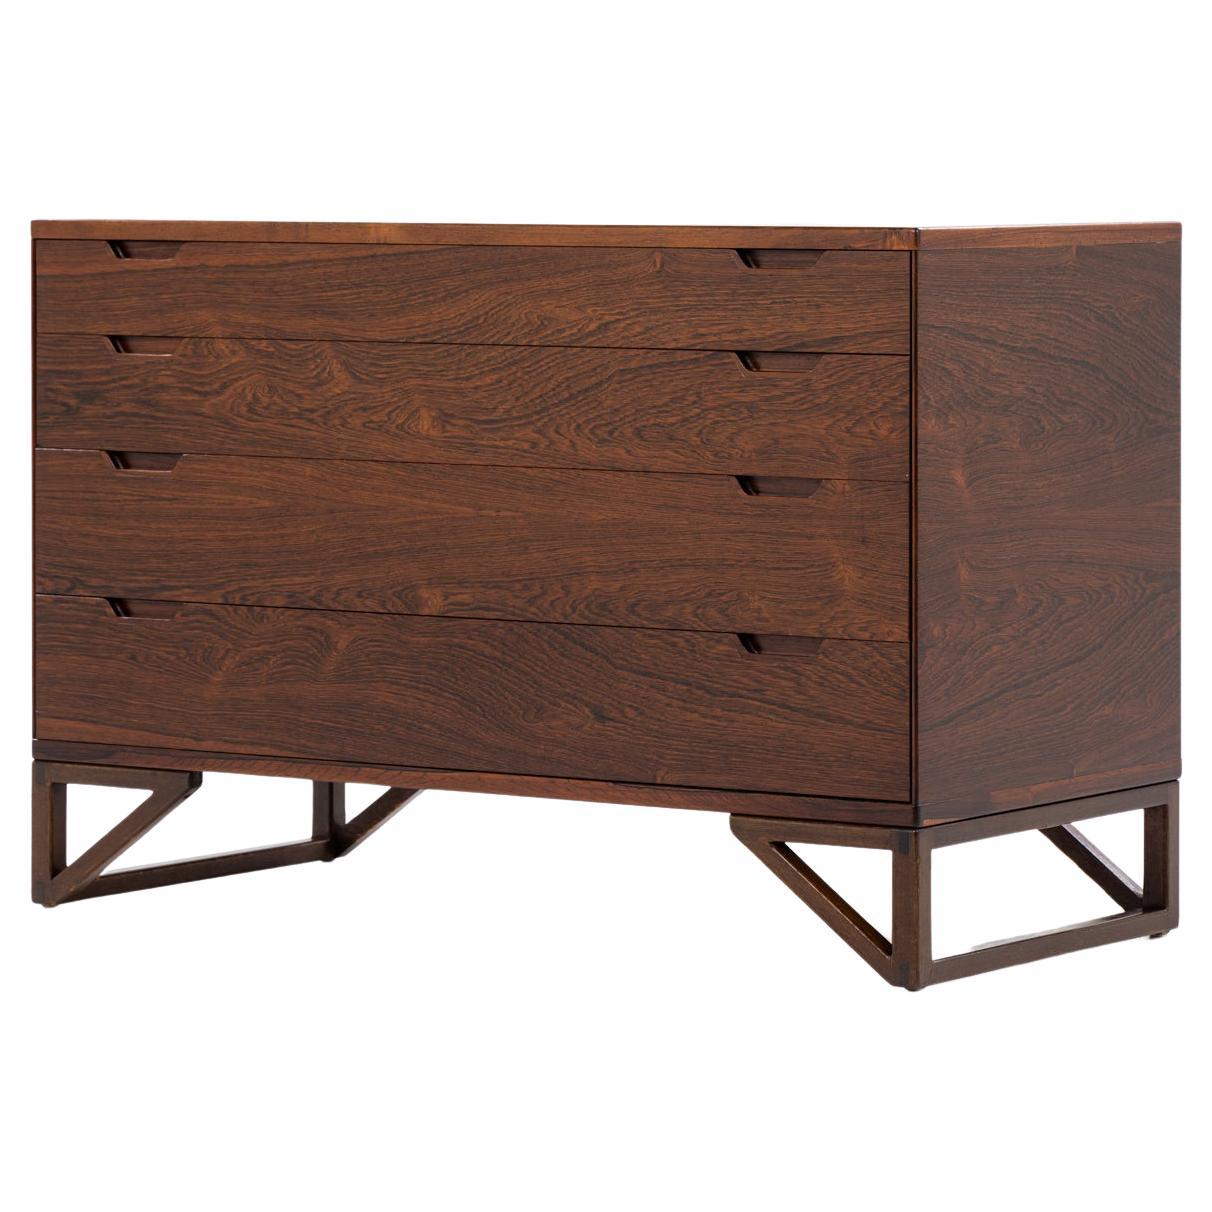 Chest of drawers by Svend Langkilde / Illums Bolighus